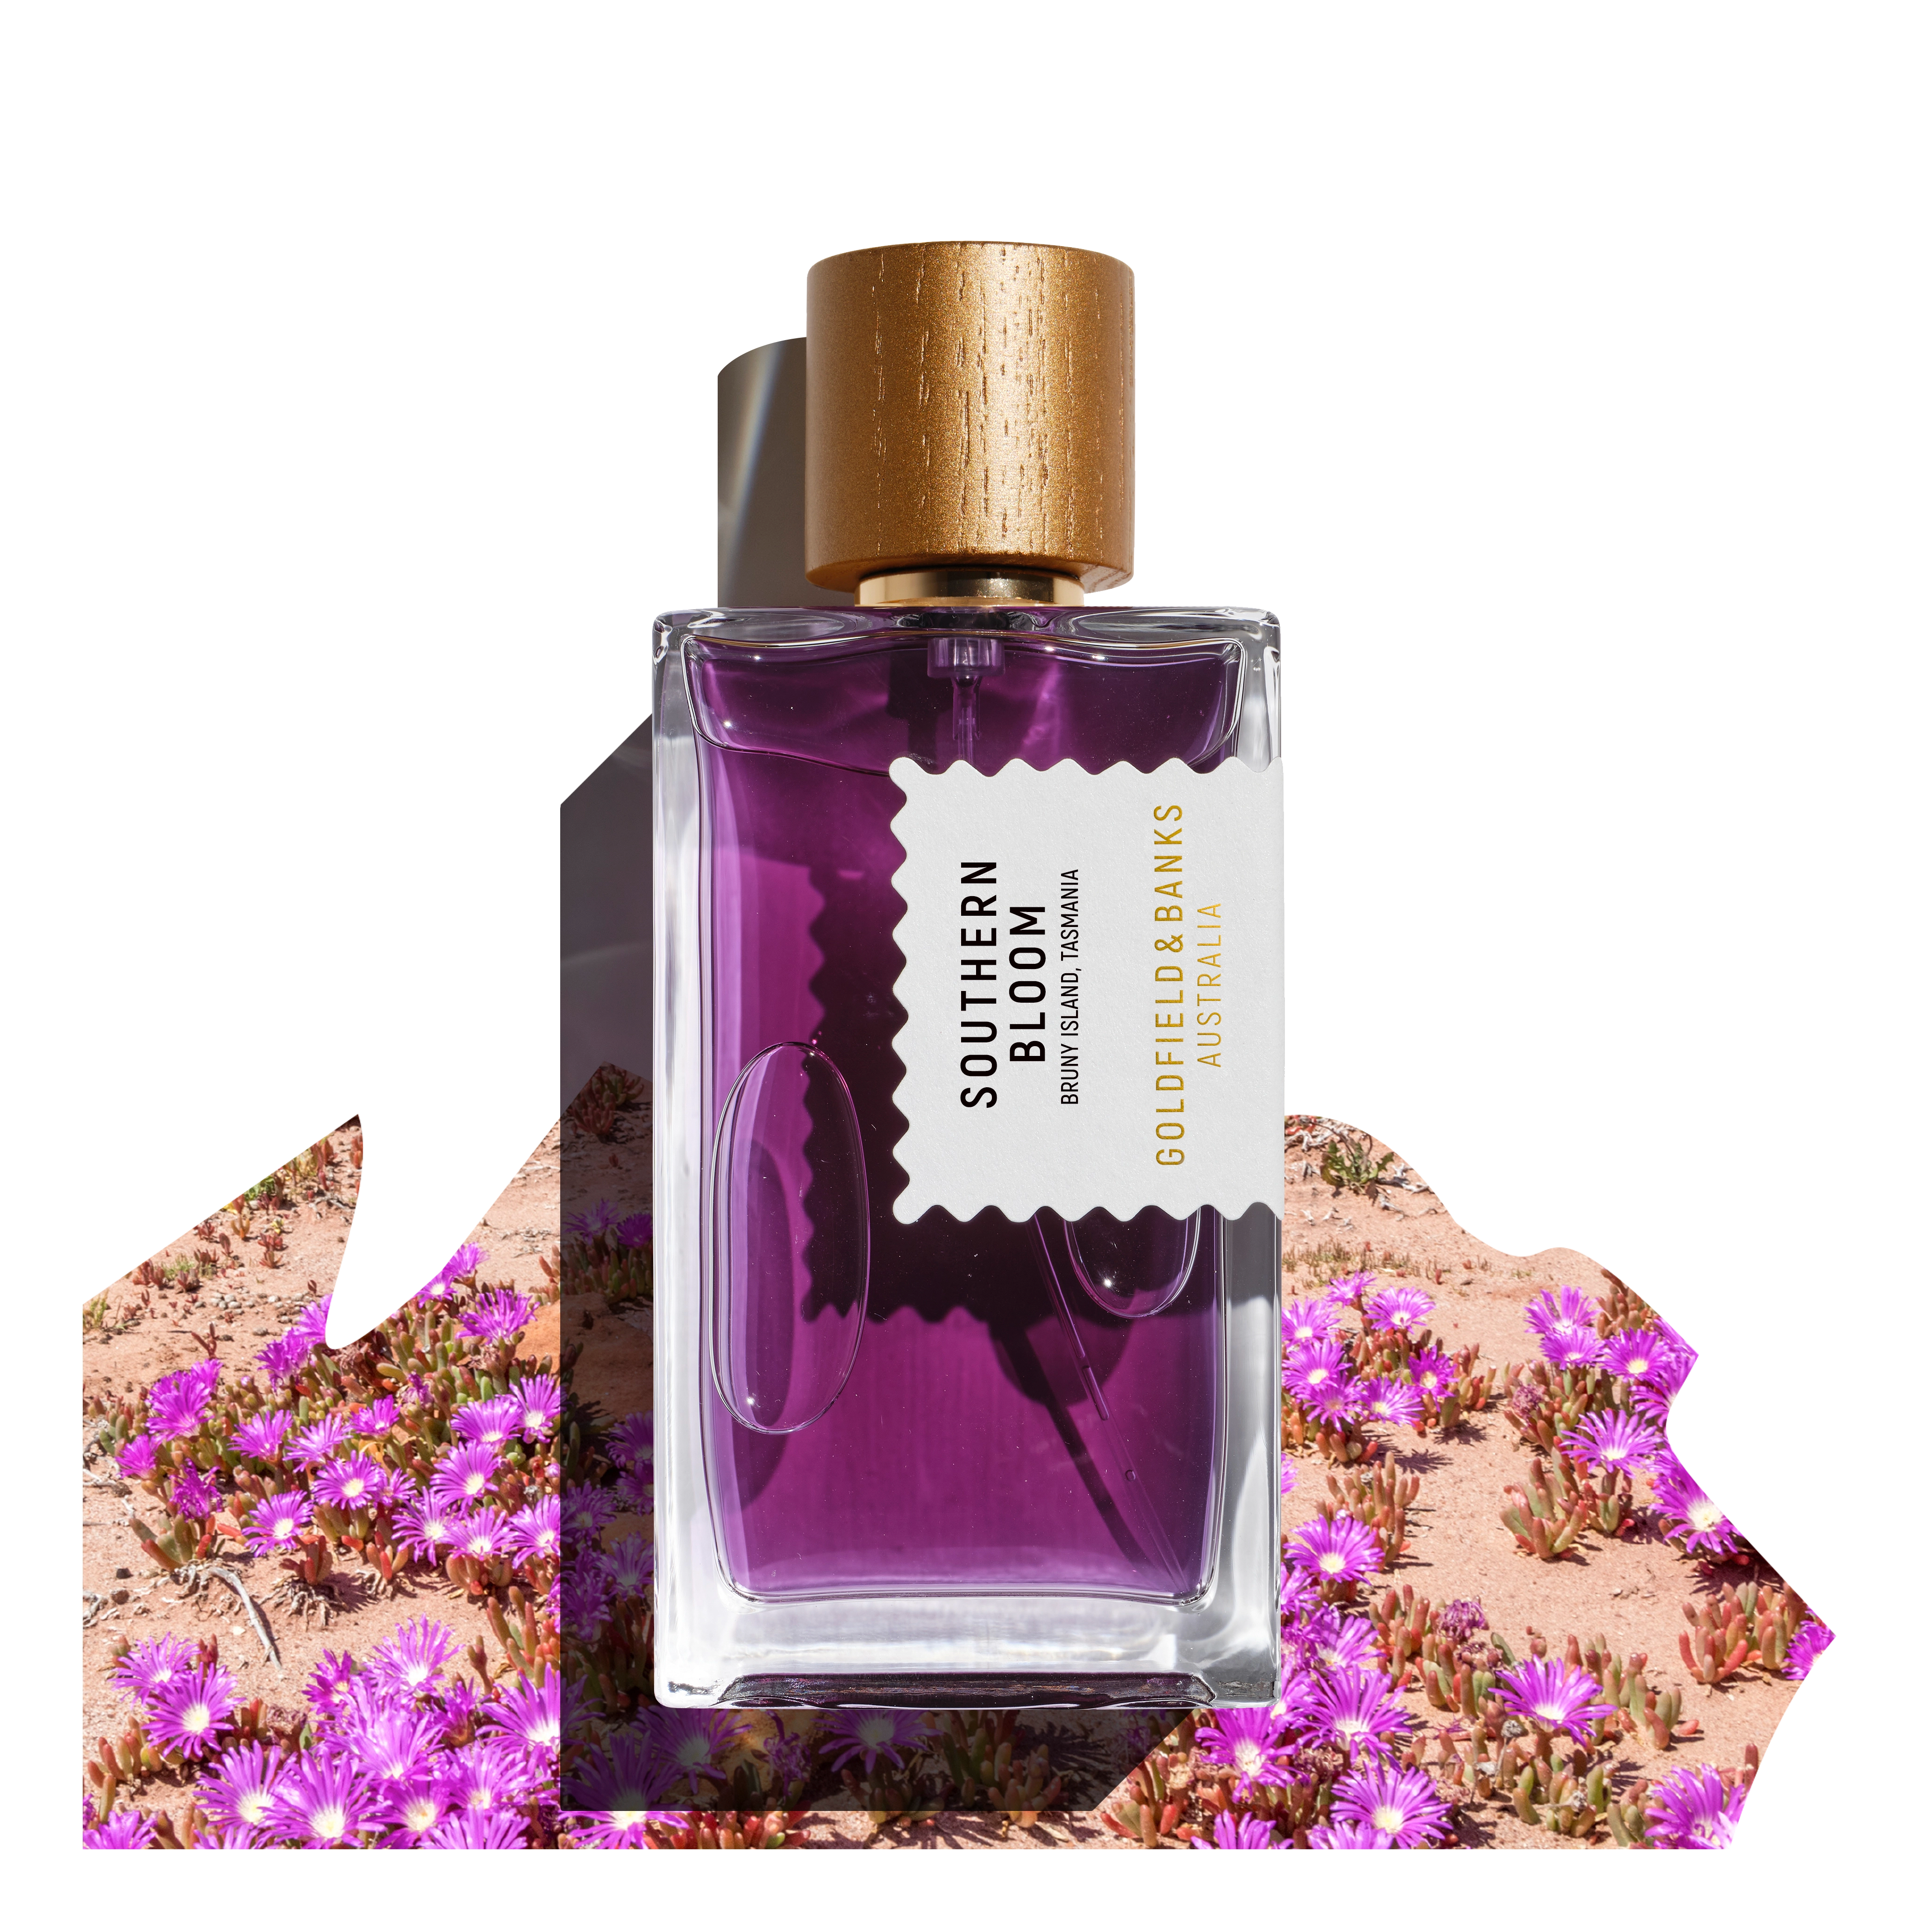 Goldfield & Banks - Southern Bloom 100ml